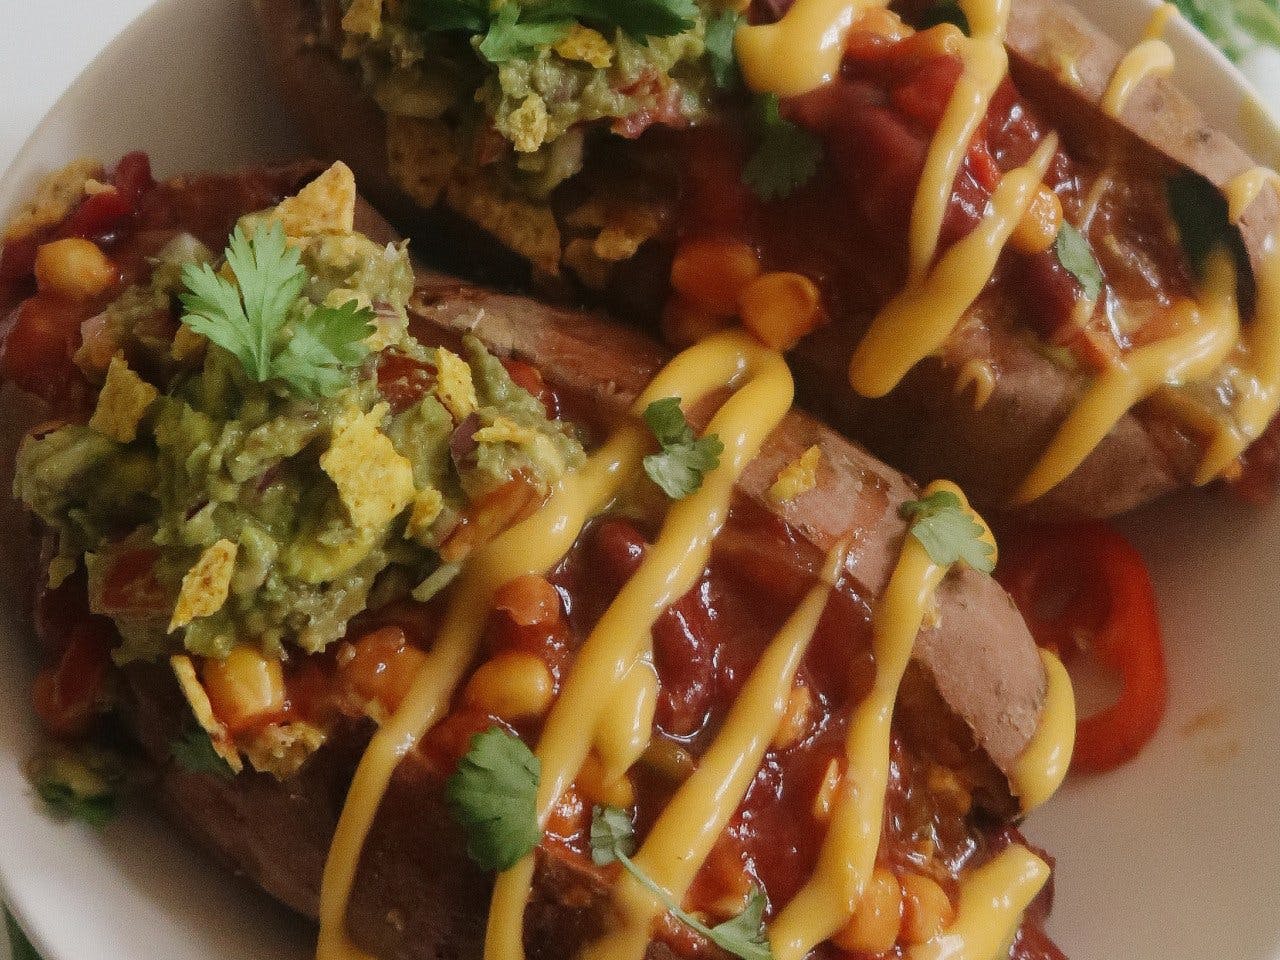 Stuffed sweet potato with Mexican salsa mix, guacamole and easy vegan cheese sauce